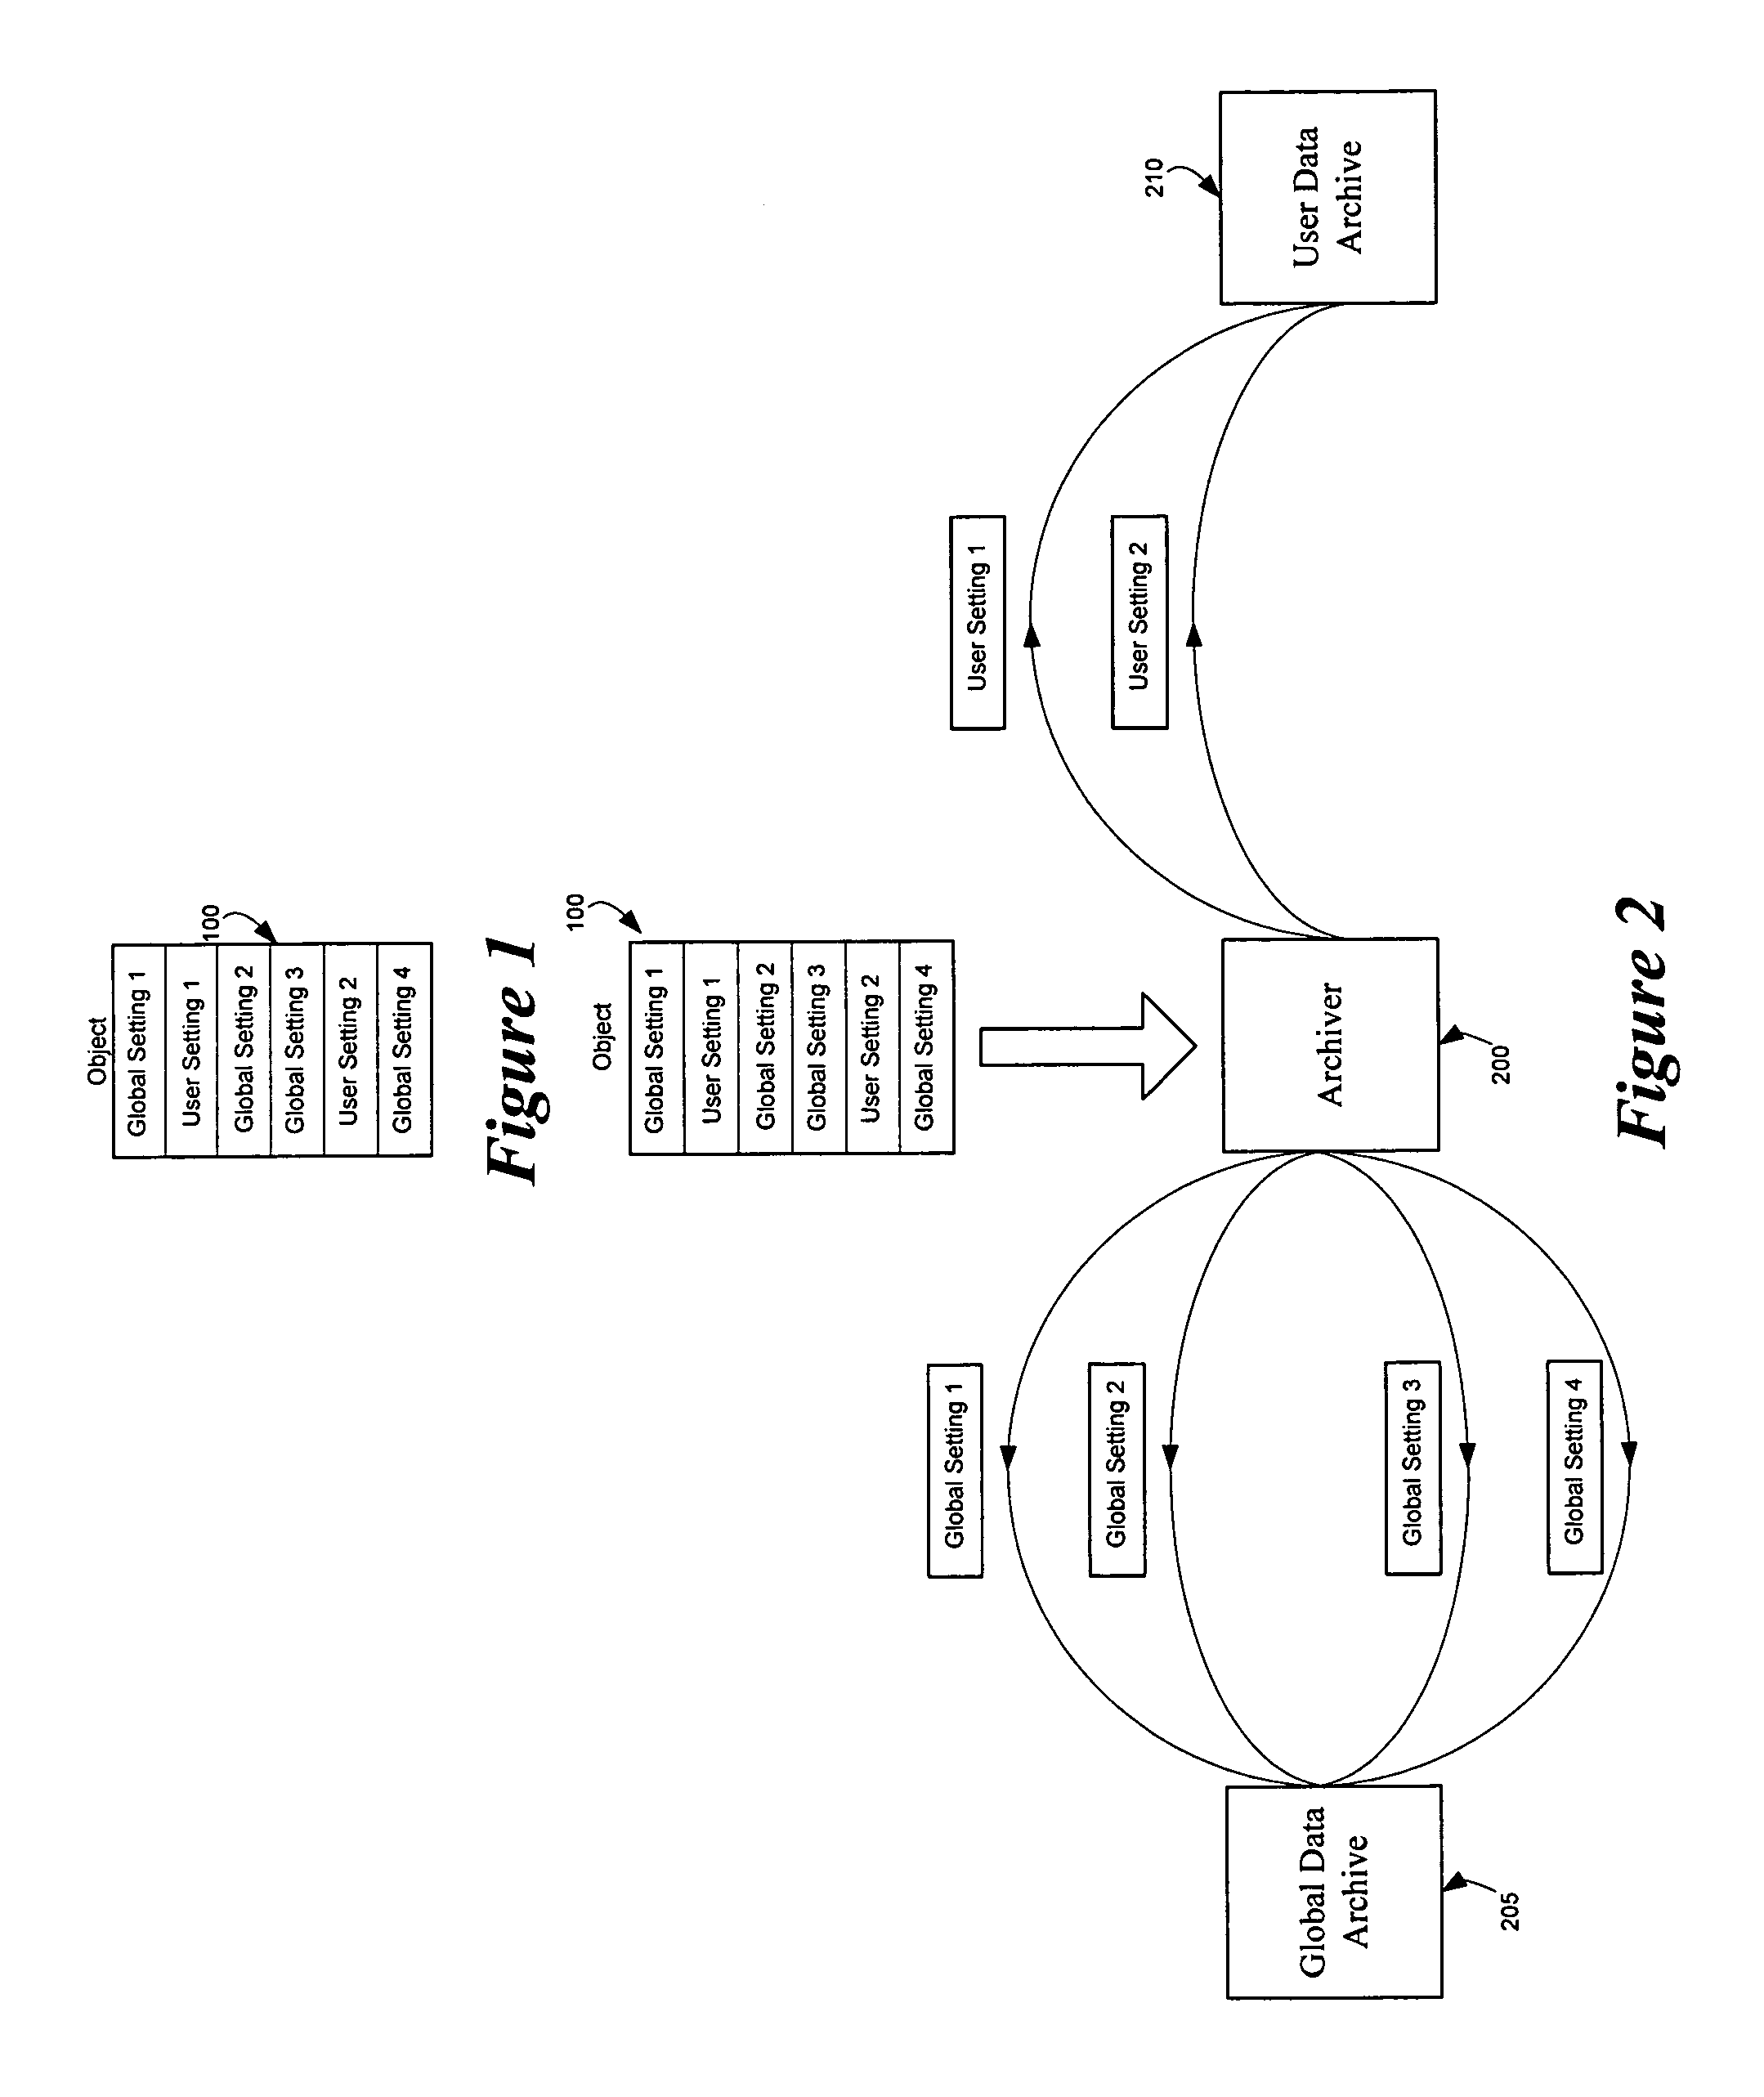 Method and apparatus for archiving and unarchiving objects